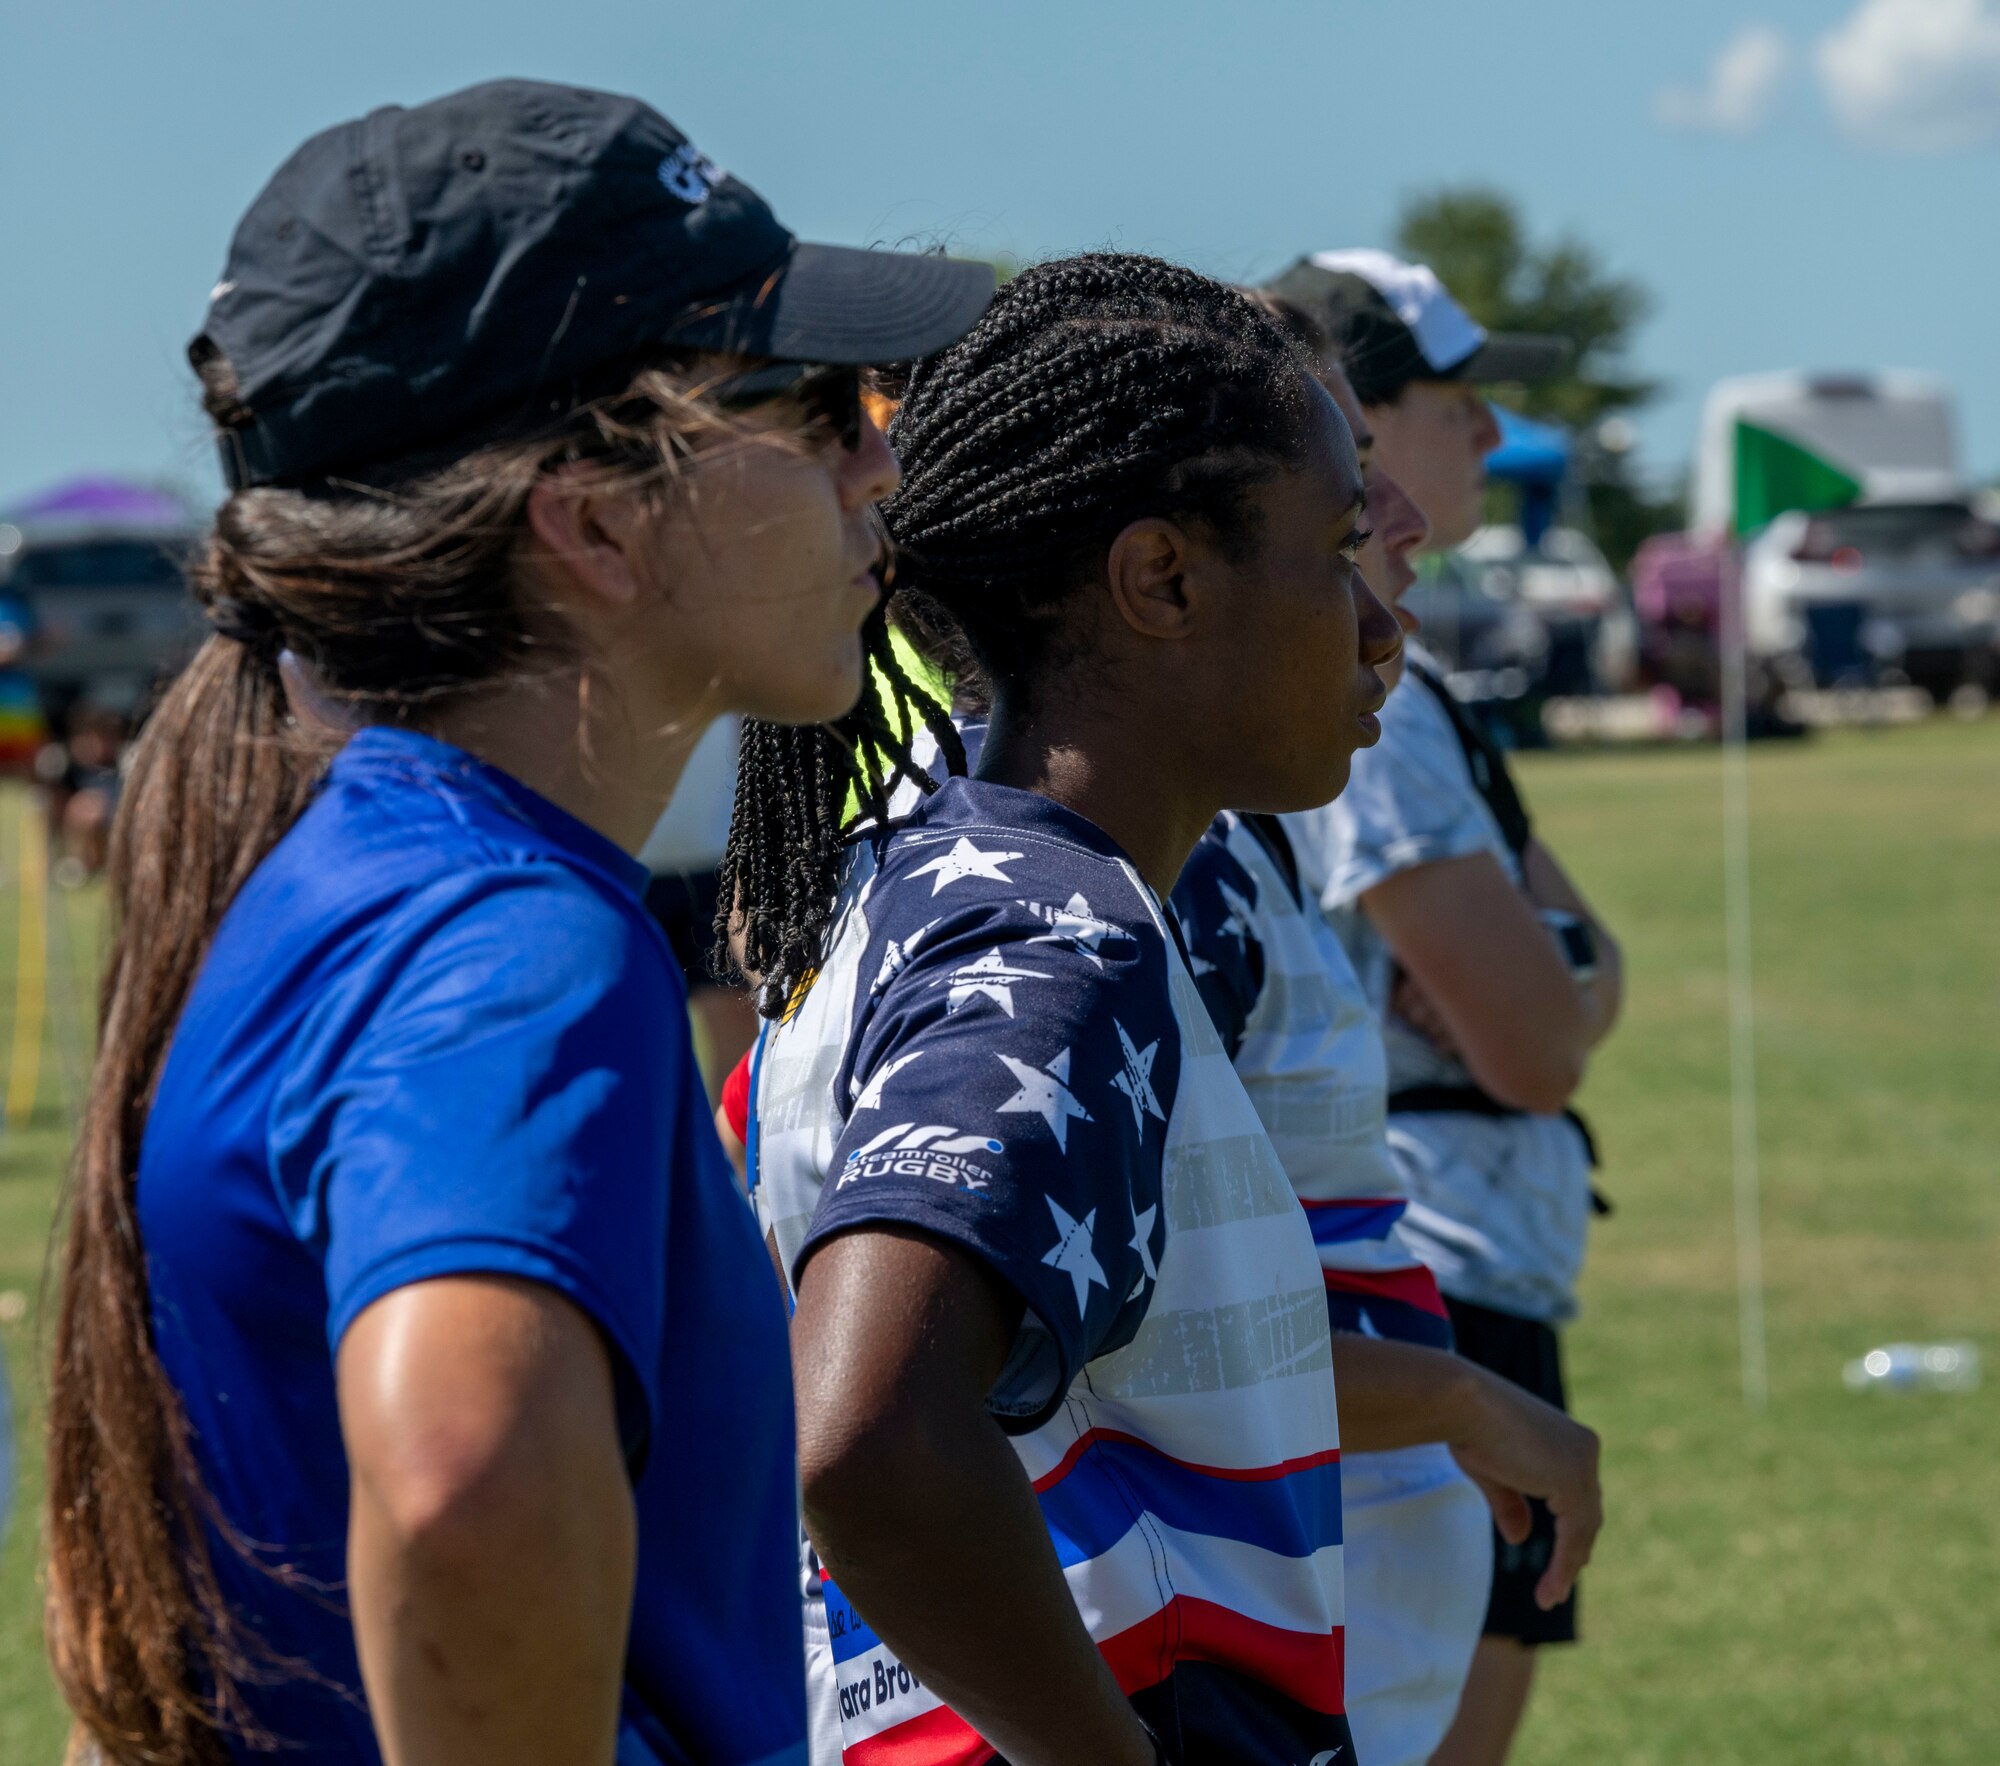 Members of the Department of Air Force Women's Rugby Team watch a game against the Northern Virginia Rugby Team after competing in the Annual Armed Forces Women’s Rugby Championship in Wilmington, North Carolina, June 26, 2022. During the championship, the Air Force defeated the Navy 15 - 5, Coast Guard 22 -7 and Marine Corps 25 - 17. They lost their match to the Army by a three-point margin, placing them second overall. (U.S. Air Force photo by Airman 1st Class Sabrina Fuller)